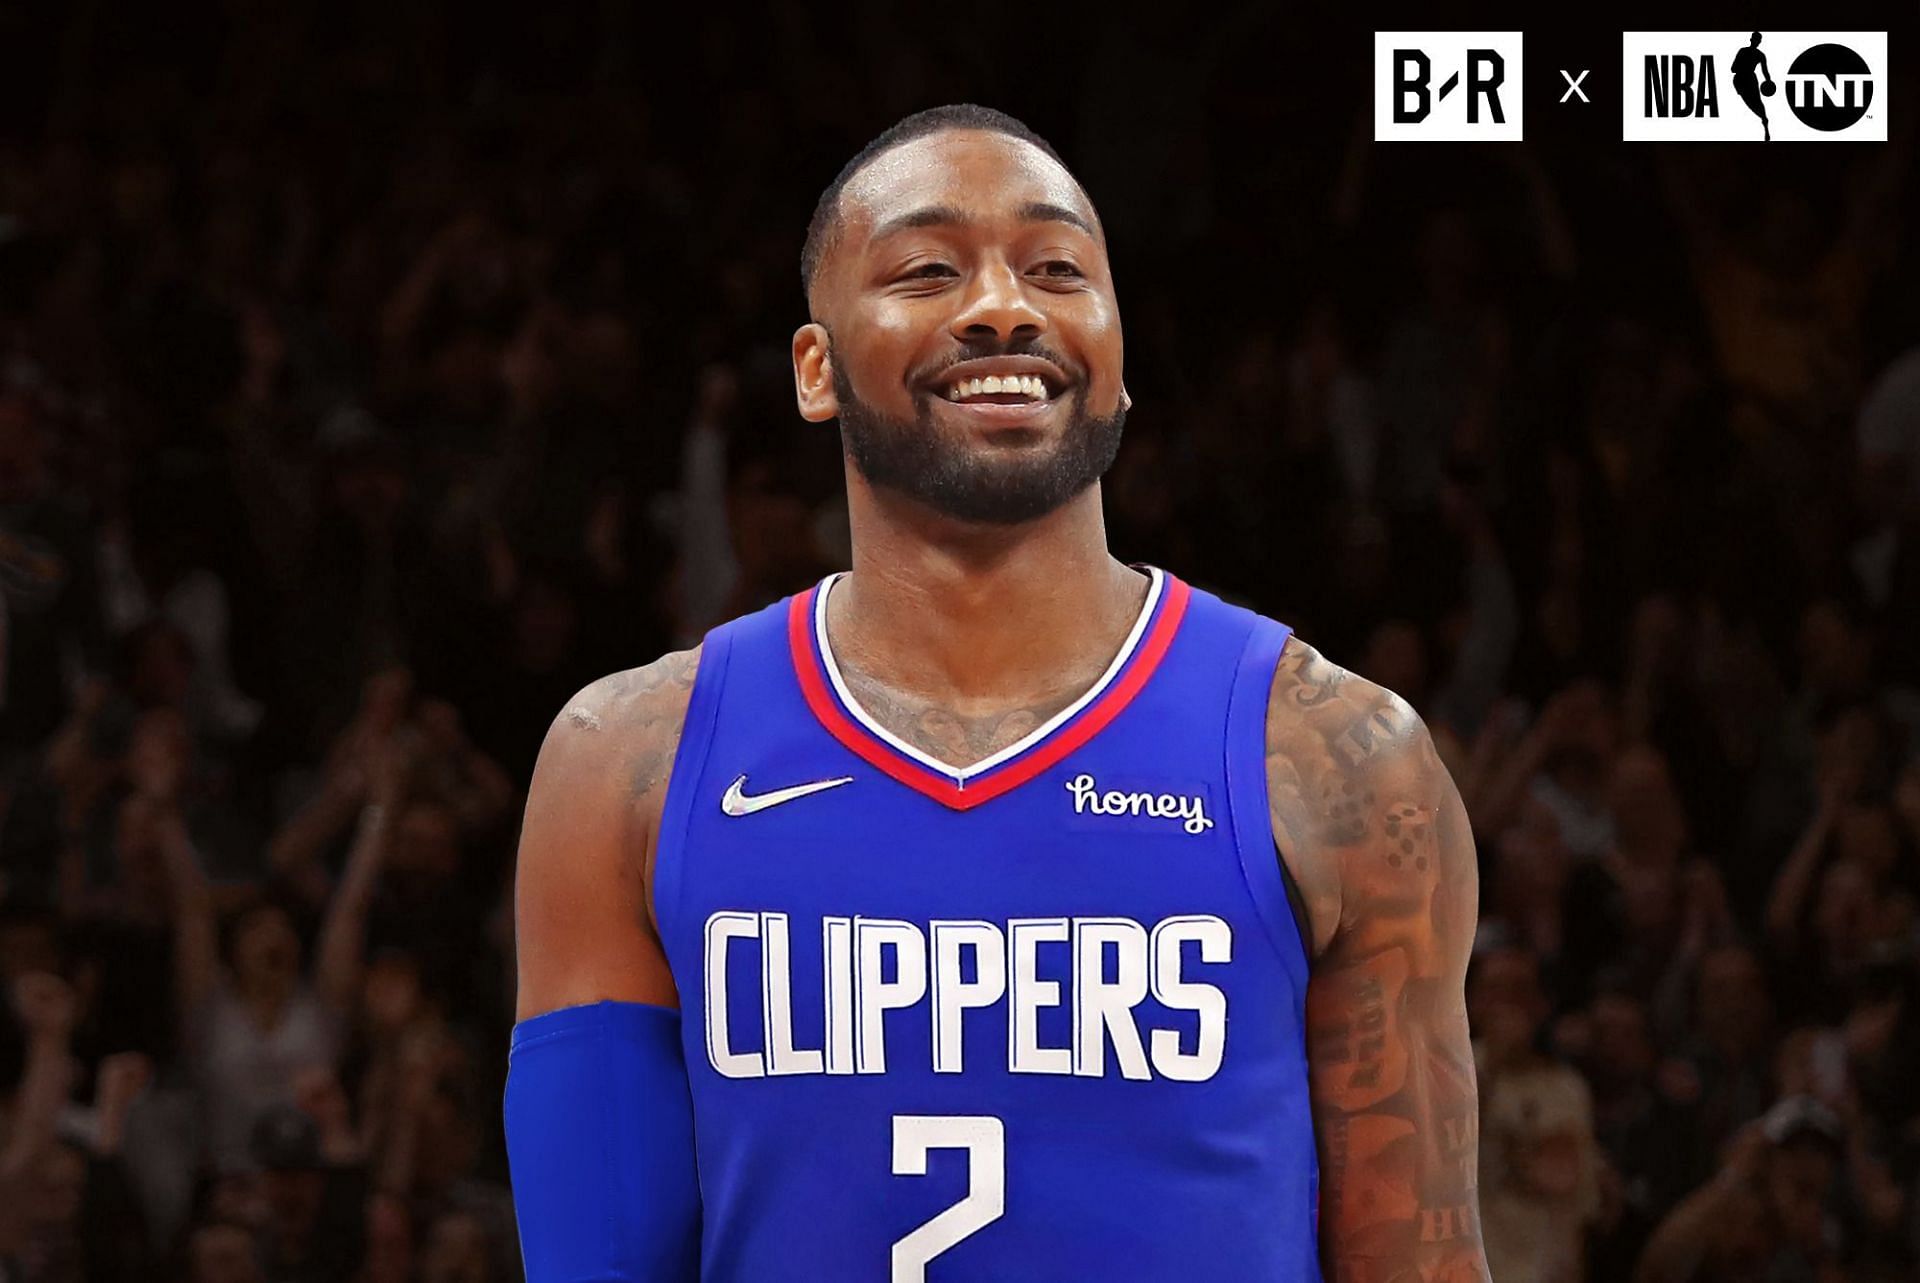 John Wall is excited to be part of the LA Clippers versus LA Lakers rivalry. [Photo: Bleacher Report]